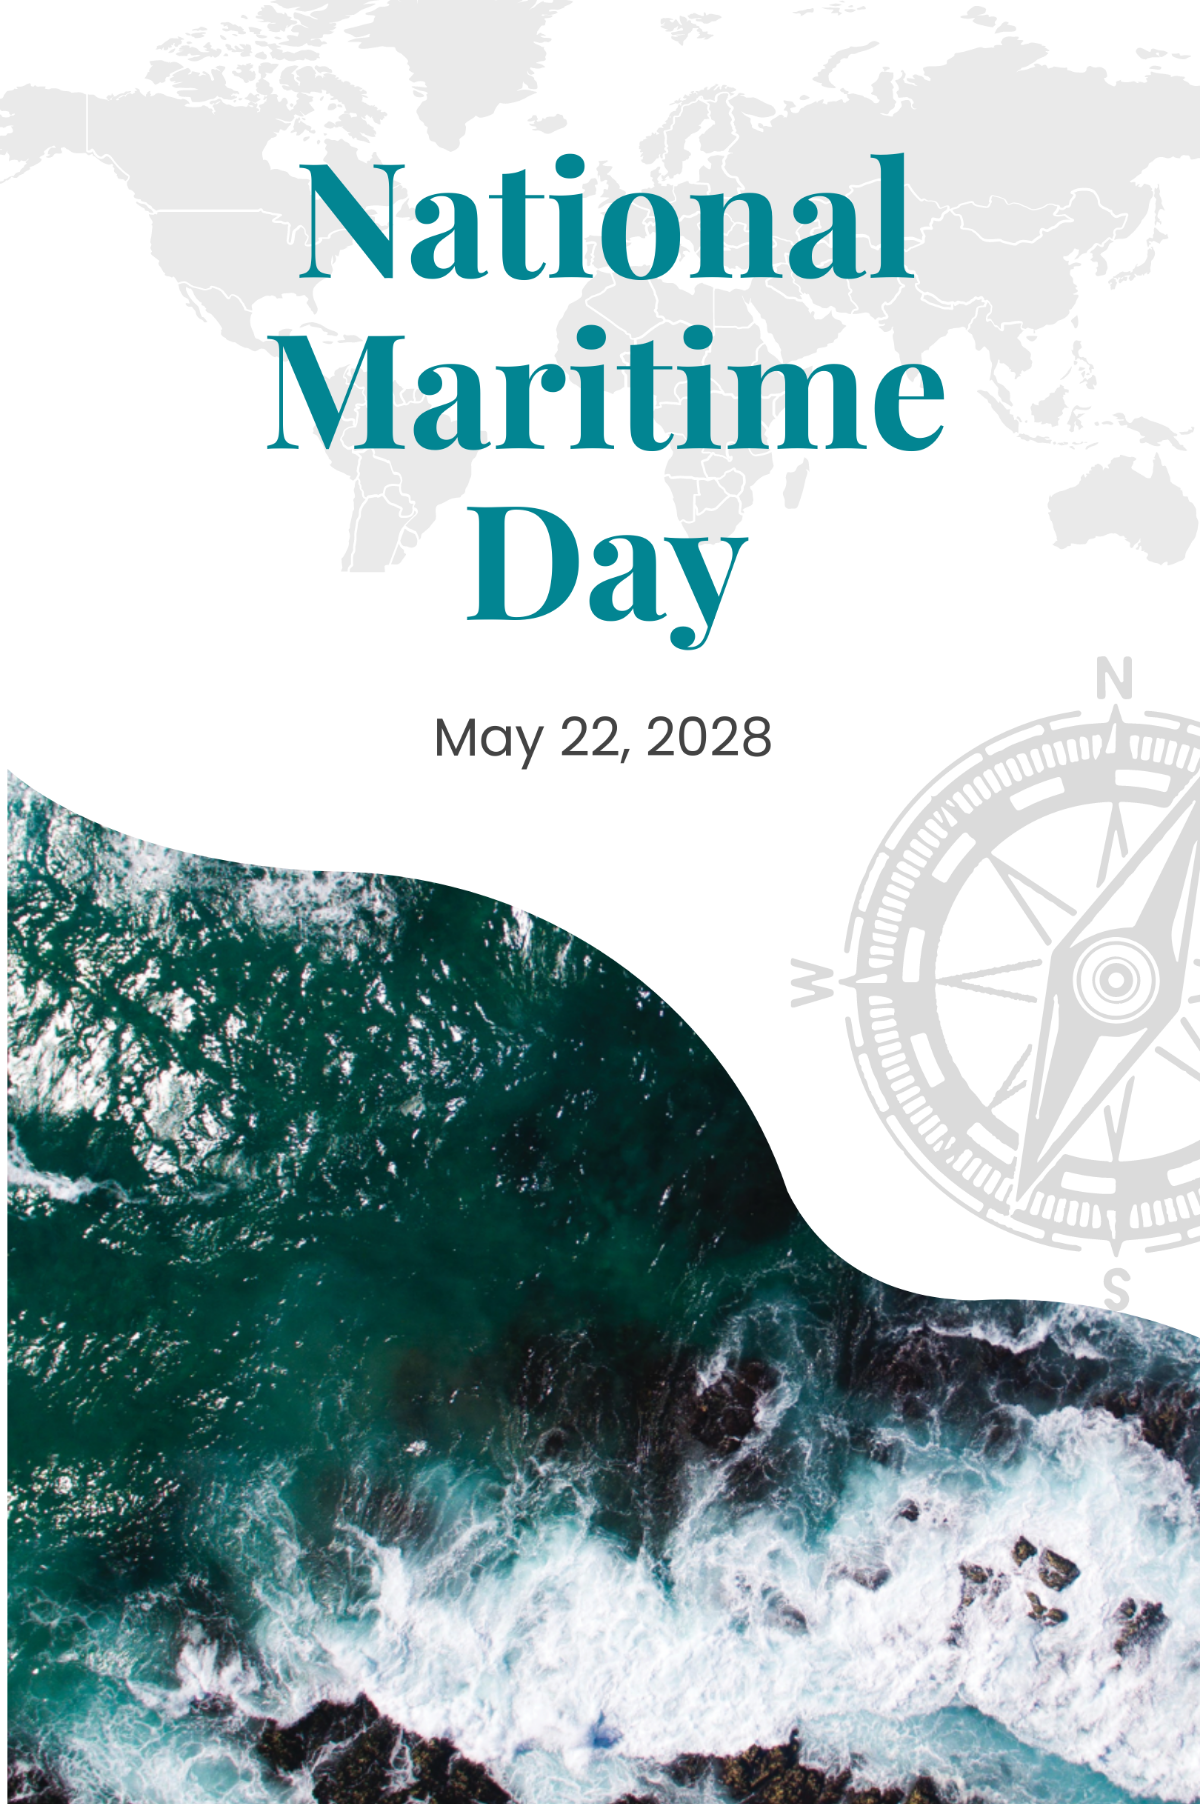 National Maritime Day Tumblr Post Template